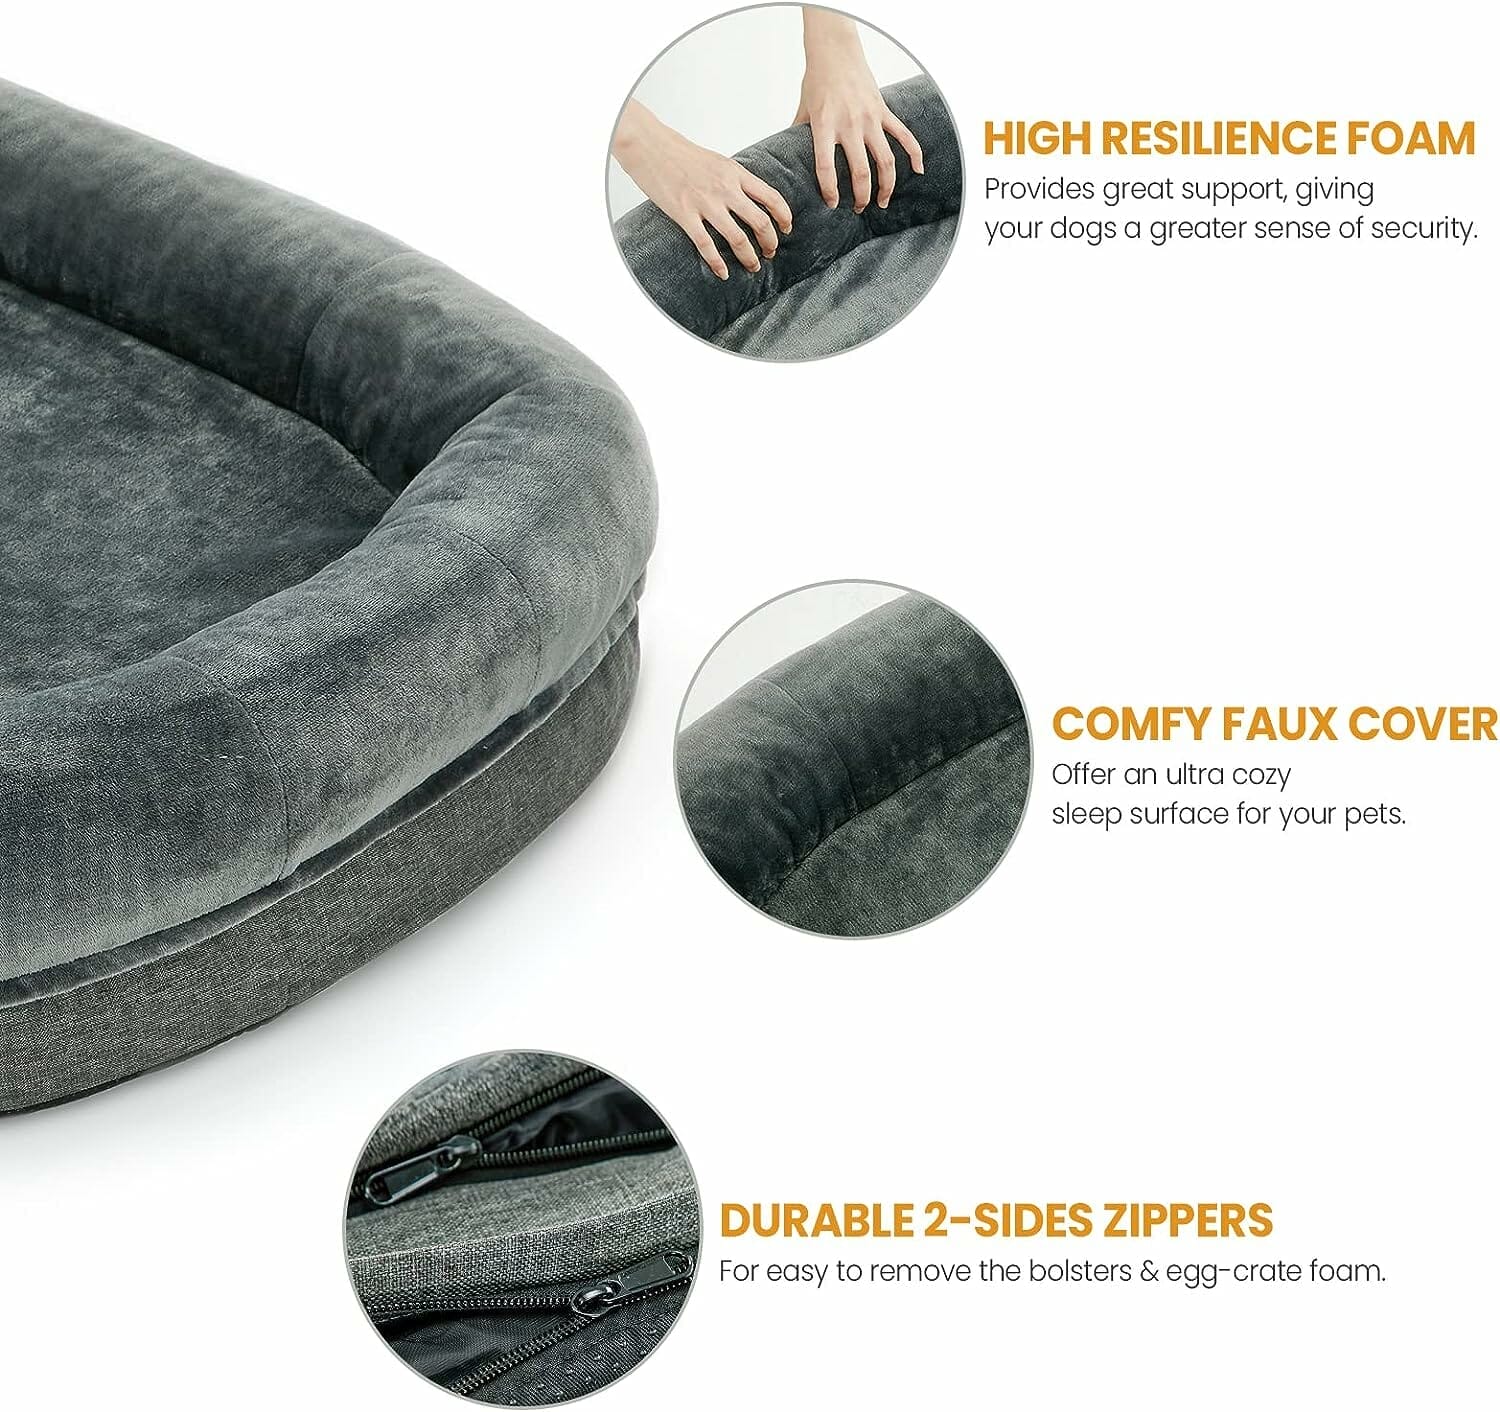 Yiruka Dog Beds For Large Dogs Review